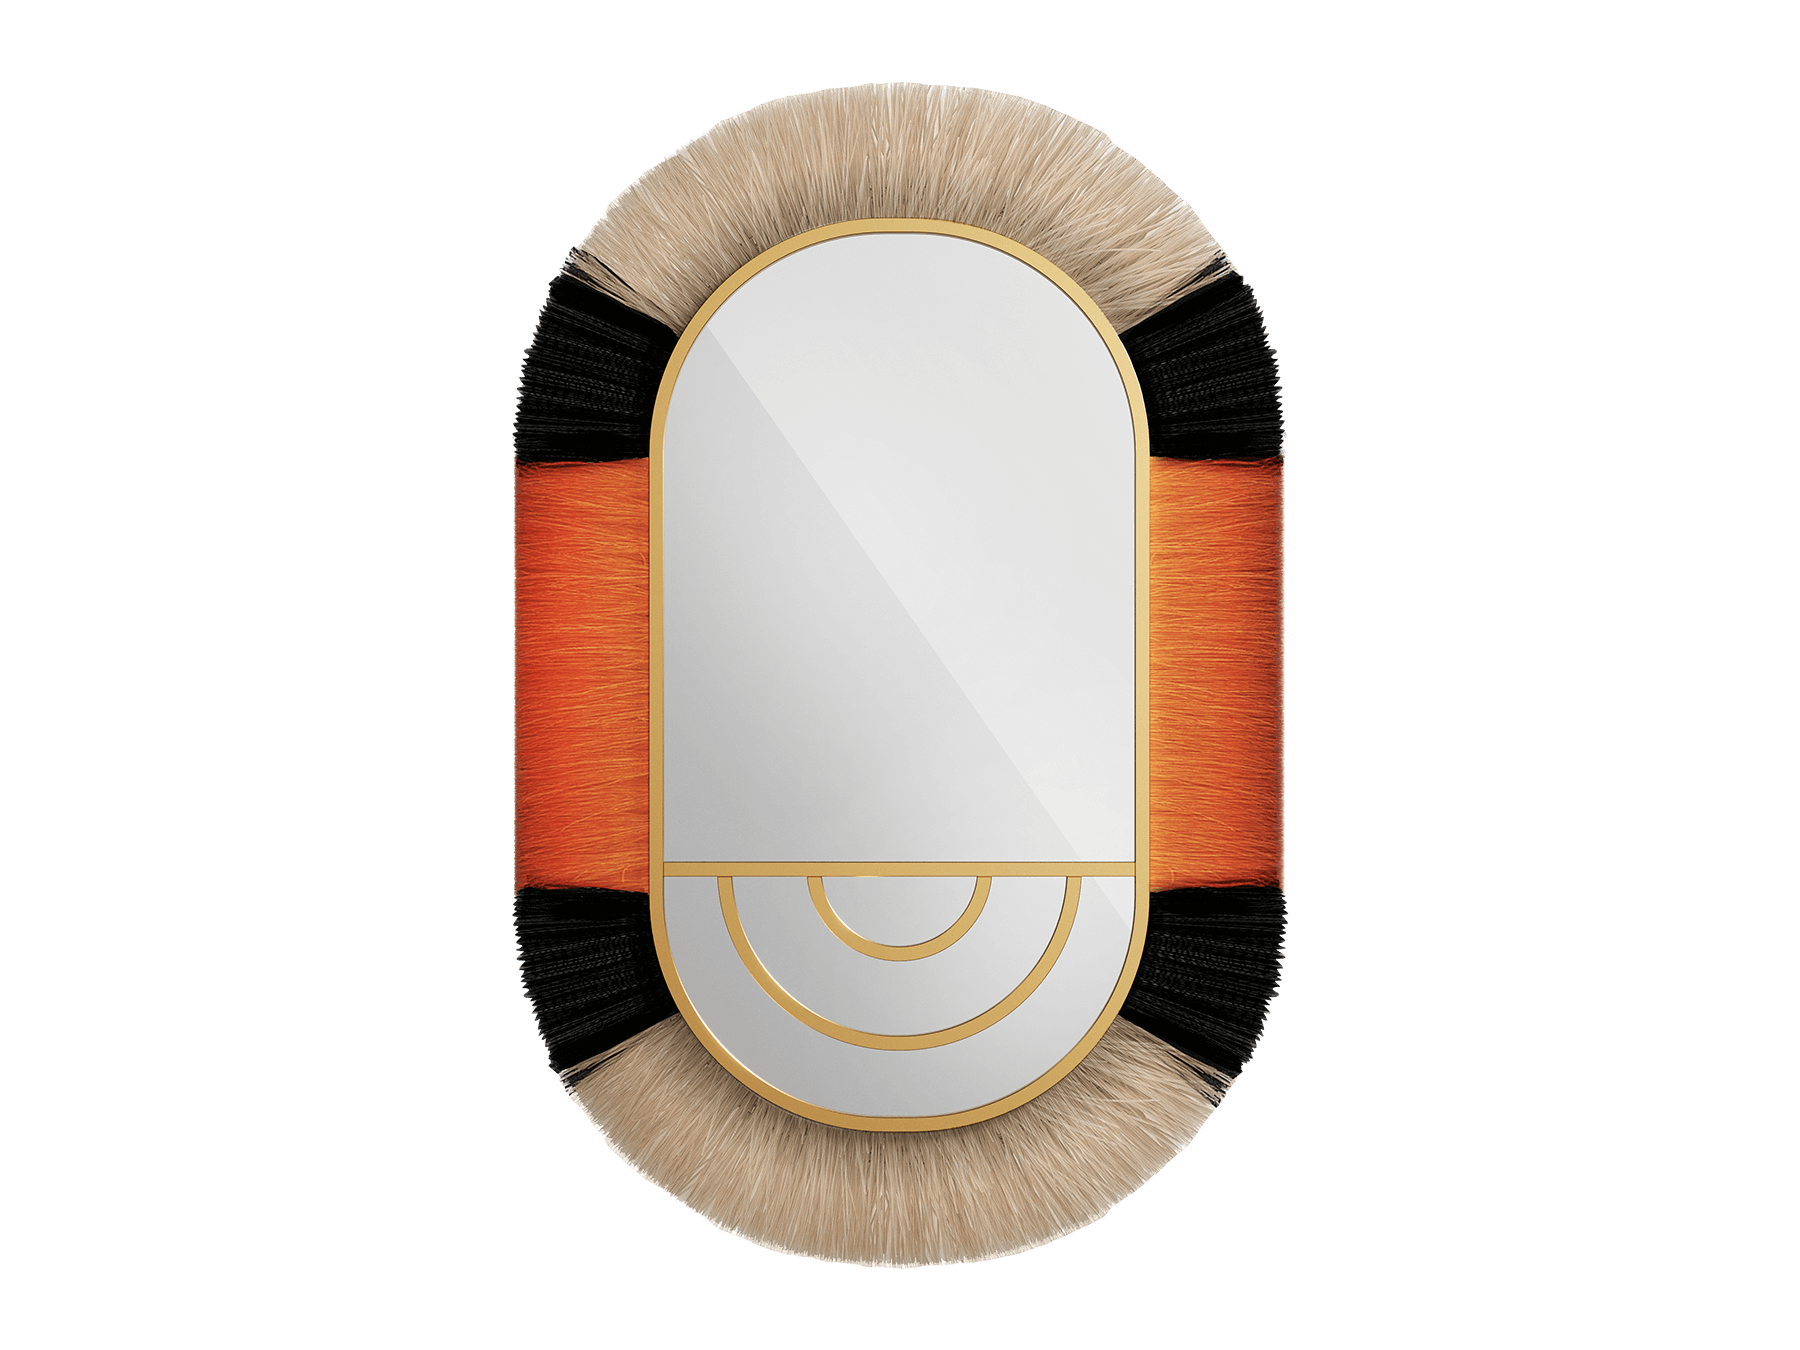 Palm decorative wall mirror for luxury wall decor